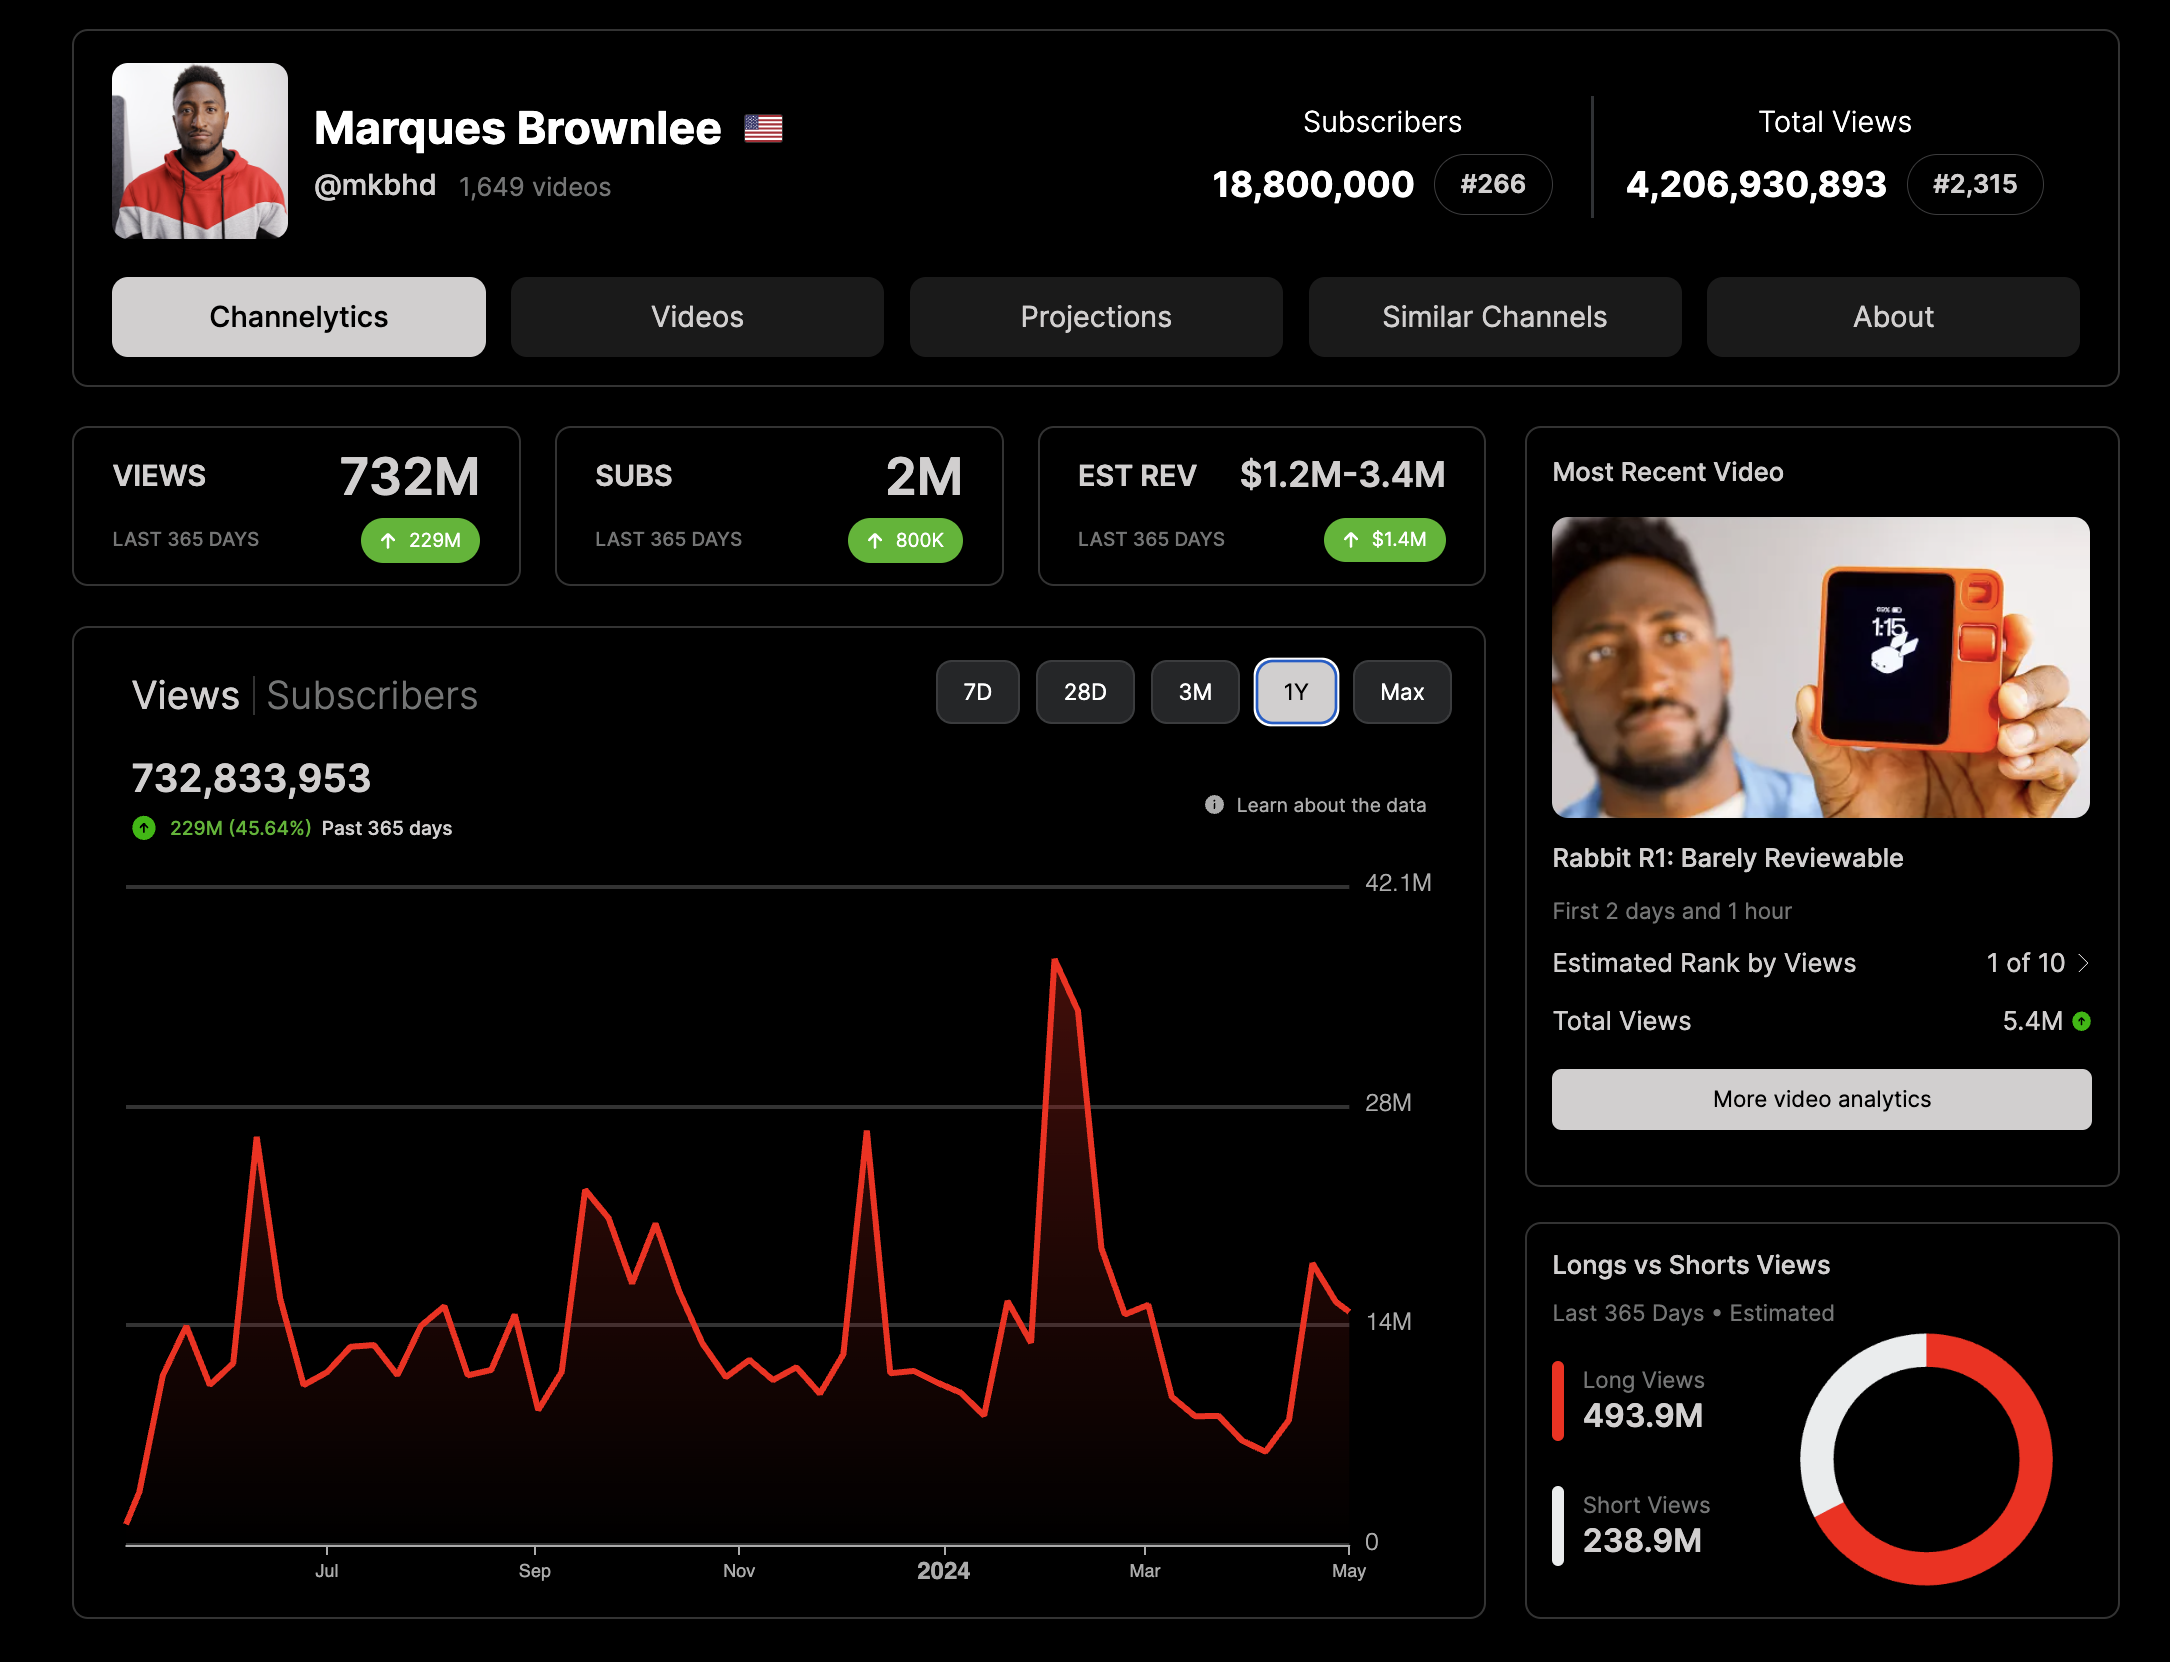 viewstats.com marques brownlee